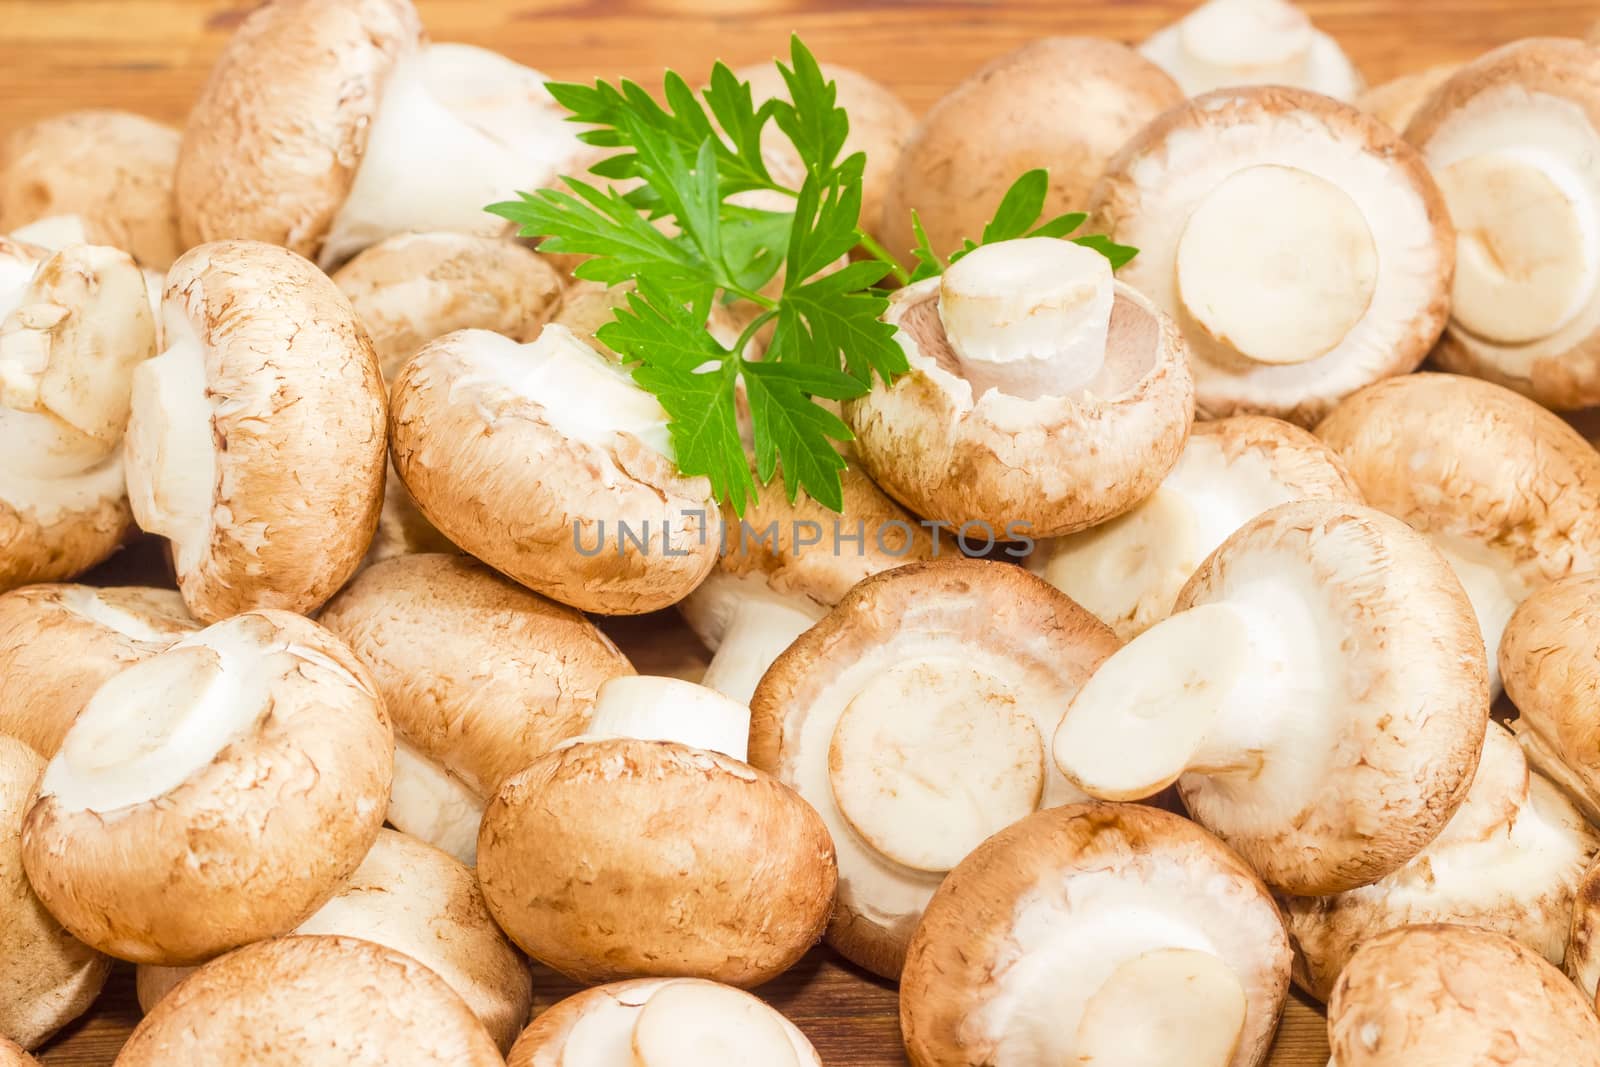 Pile of the whole uncooked edible mushrooms with twig of the parsley on a wooden surface
